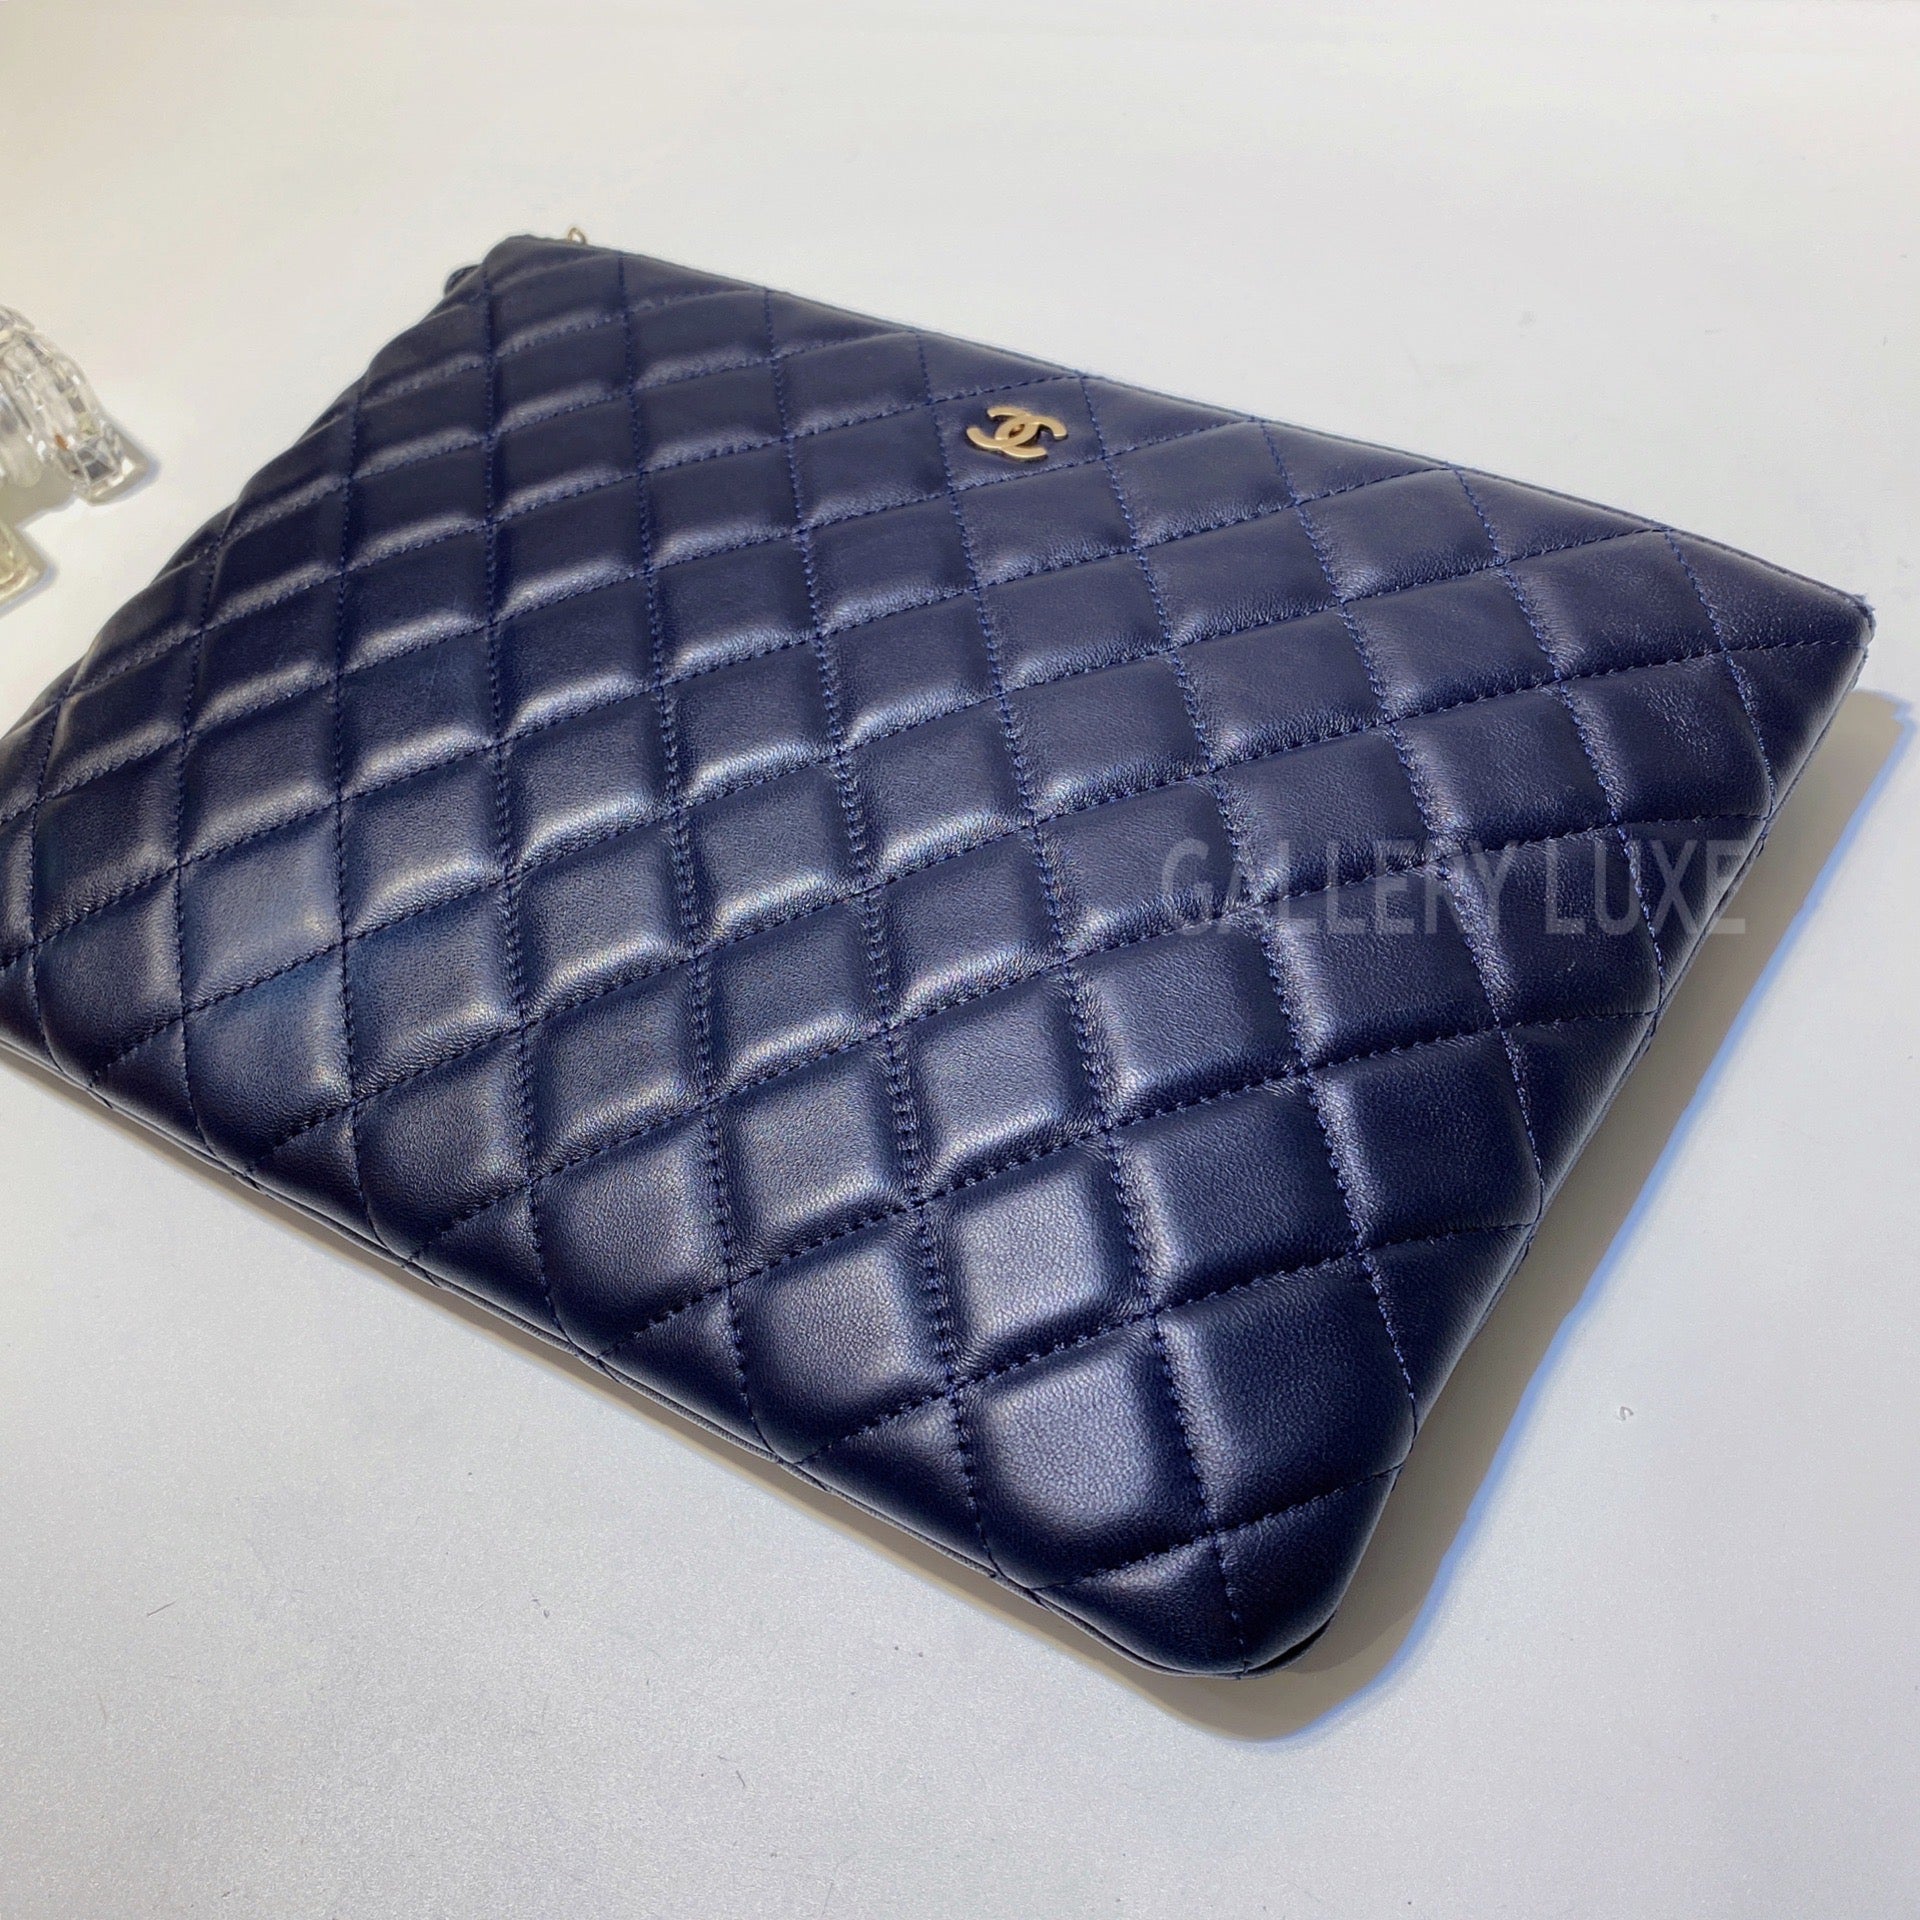 Chanel O Case Clutch Quilted Lambskin Medium Red 1658231